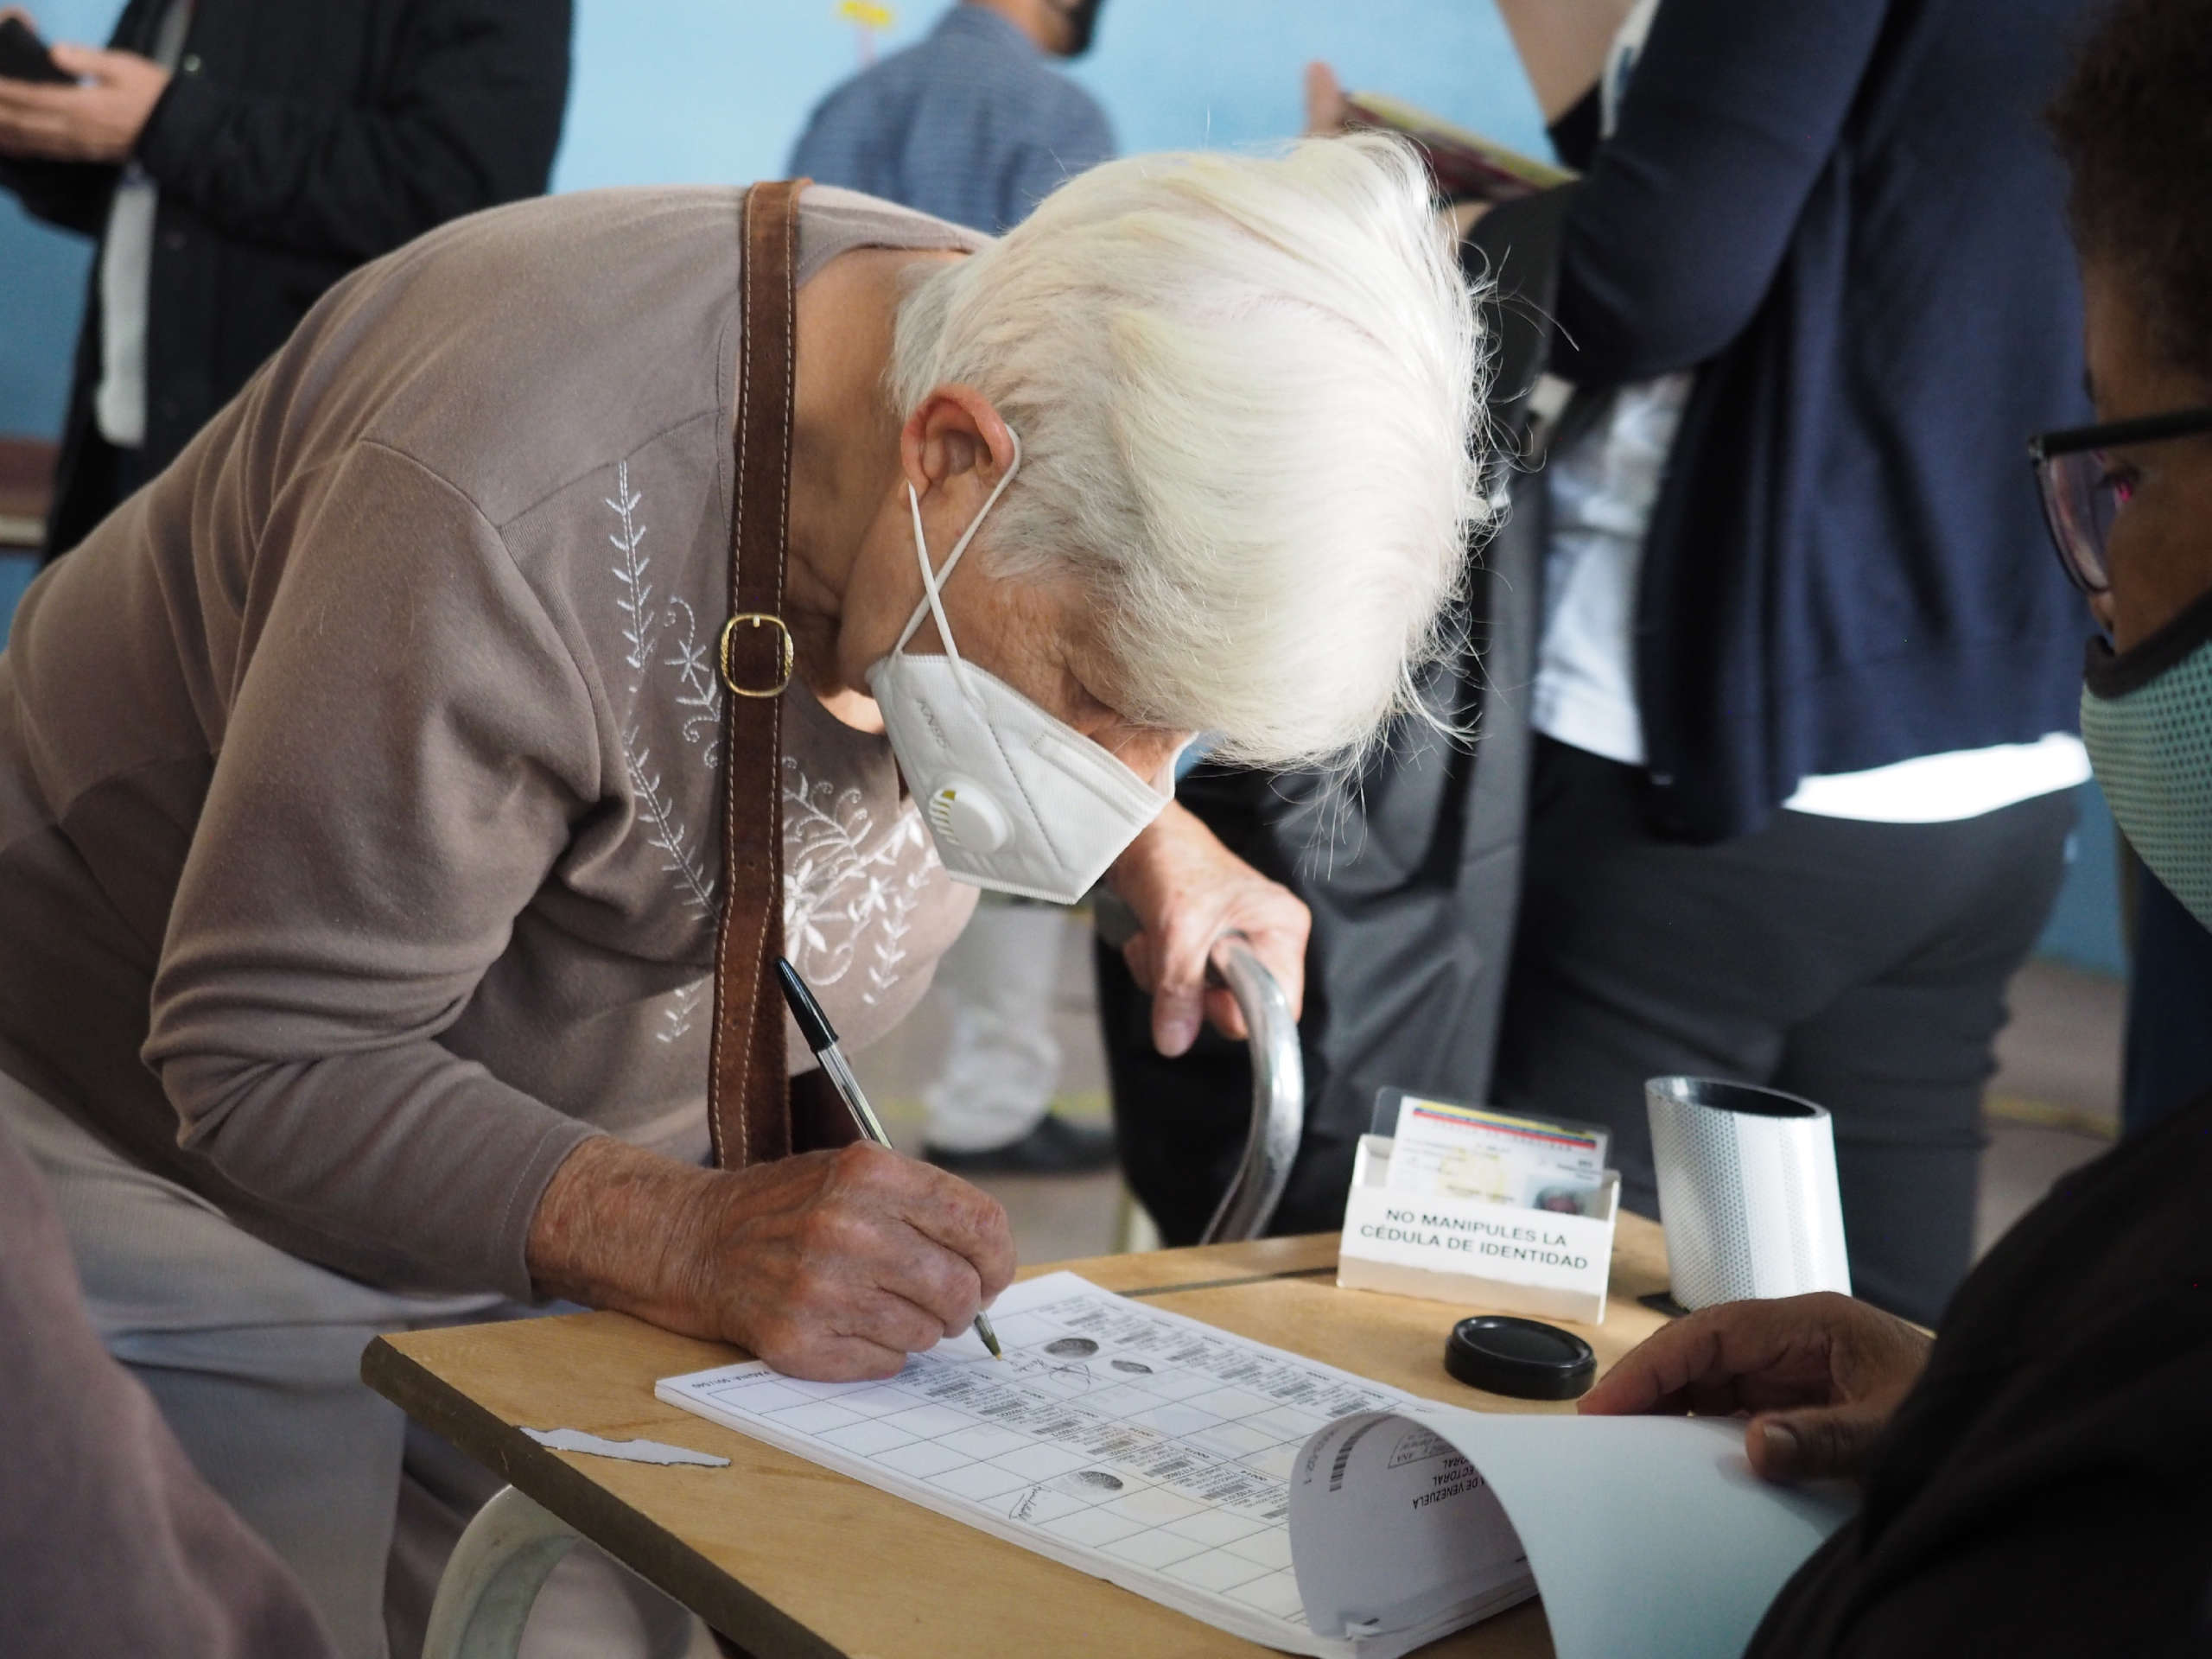 A woman signs her name as part of the voting process to prevent fraud at the Liceo Pedro Emilio Coll in the Coche Parish in Caracas, Venezuela during elections on November 21, 2021.